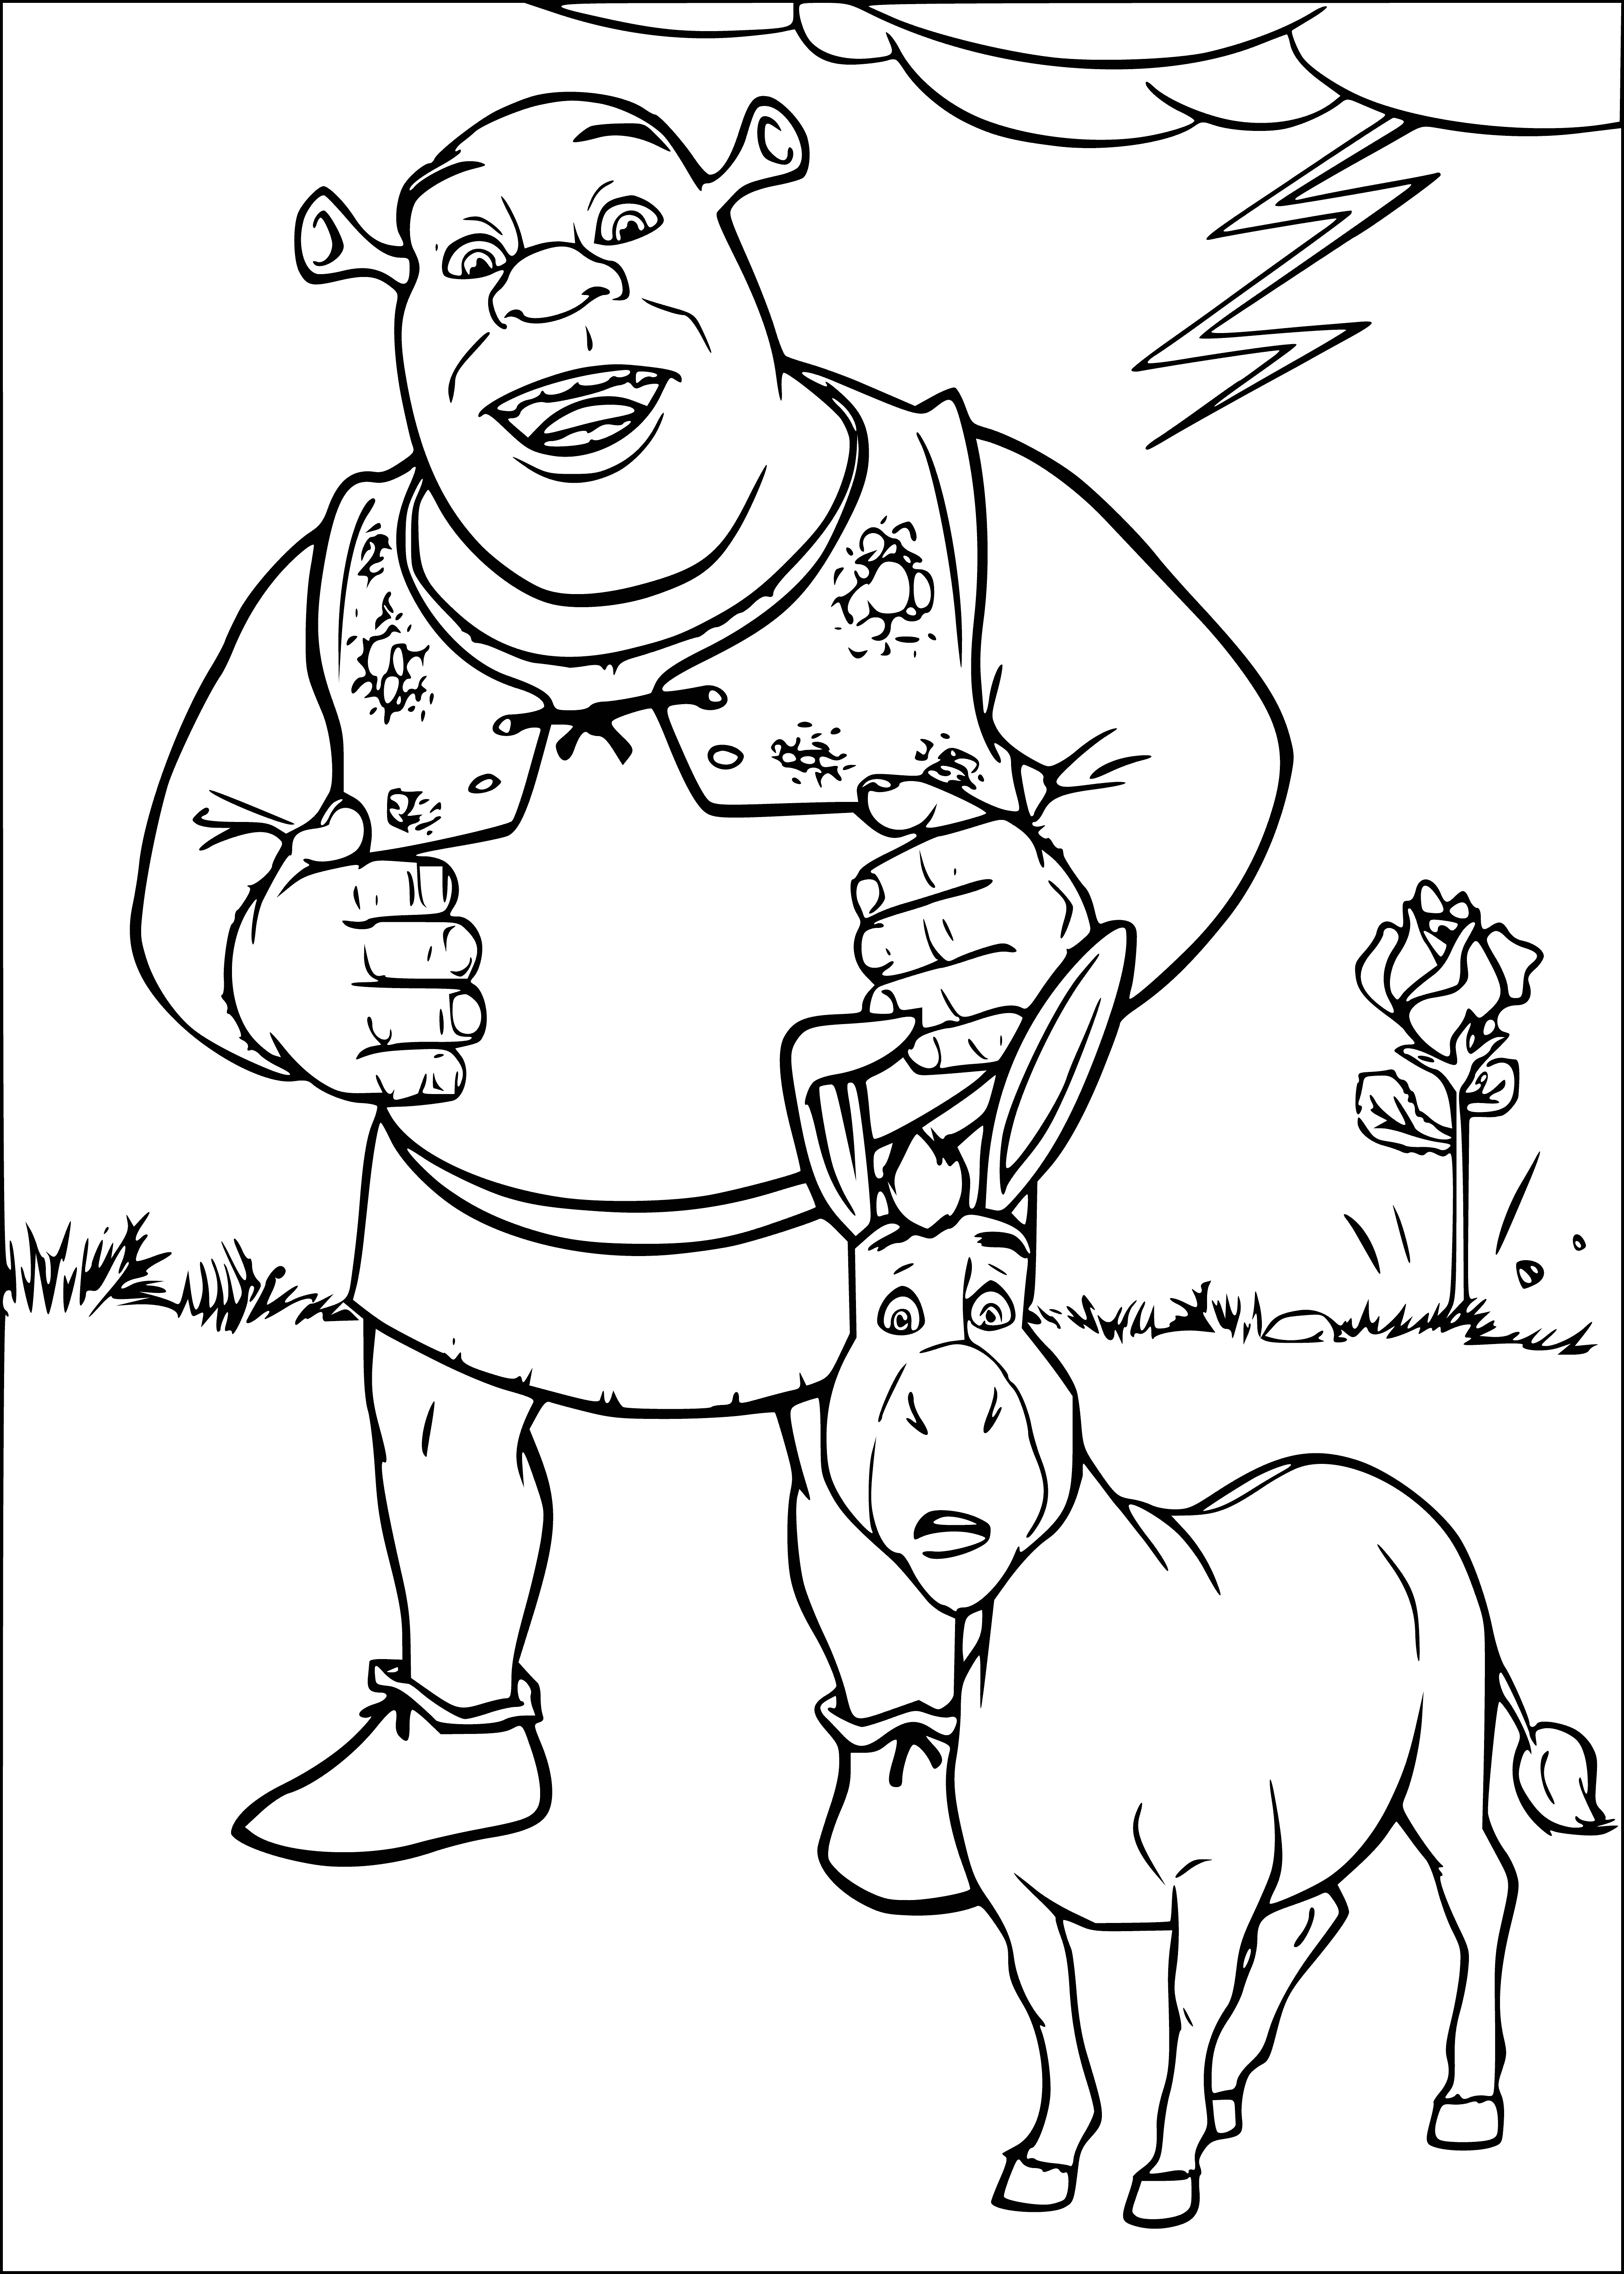 Shrek and donkey coloring page